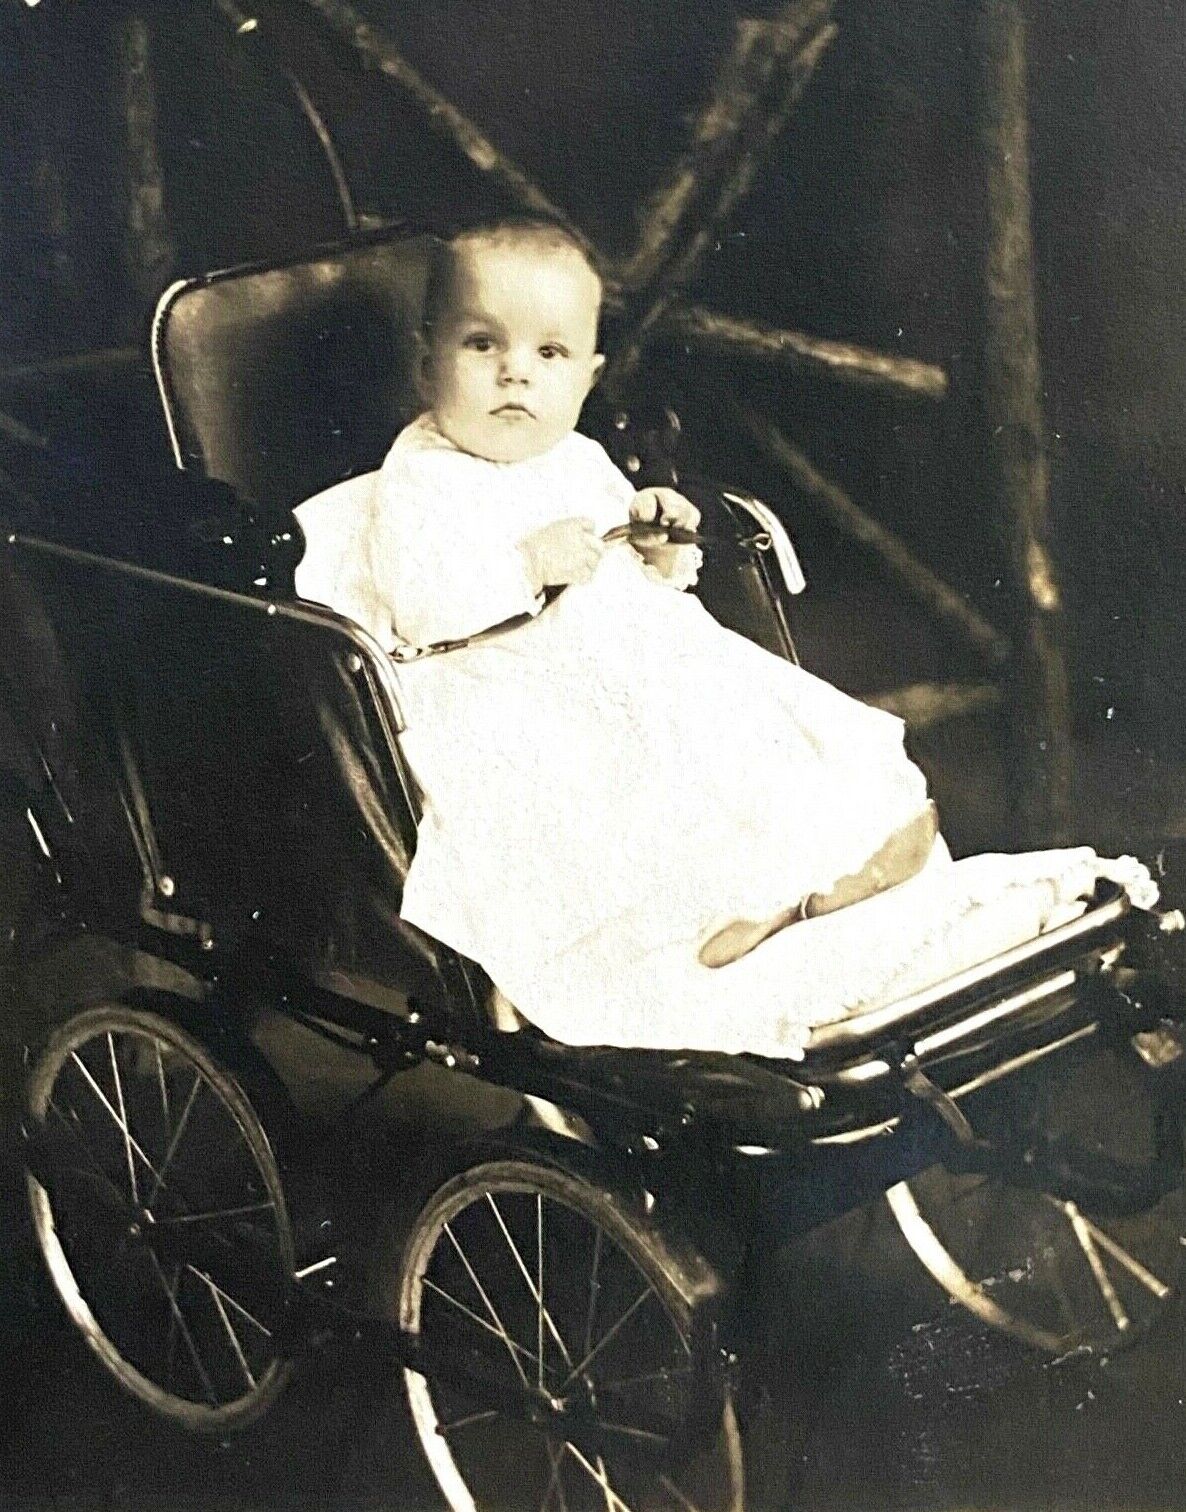 1910 RPPC - BABY IN STROLLER antique real photo postcard INFANT PRAM PHOTOGRAPH